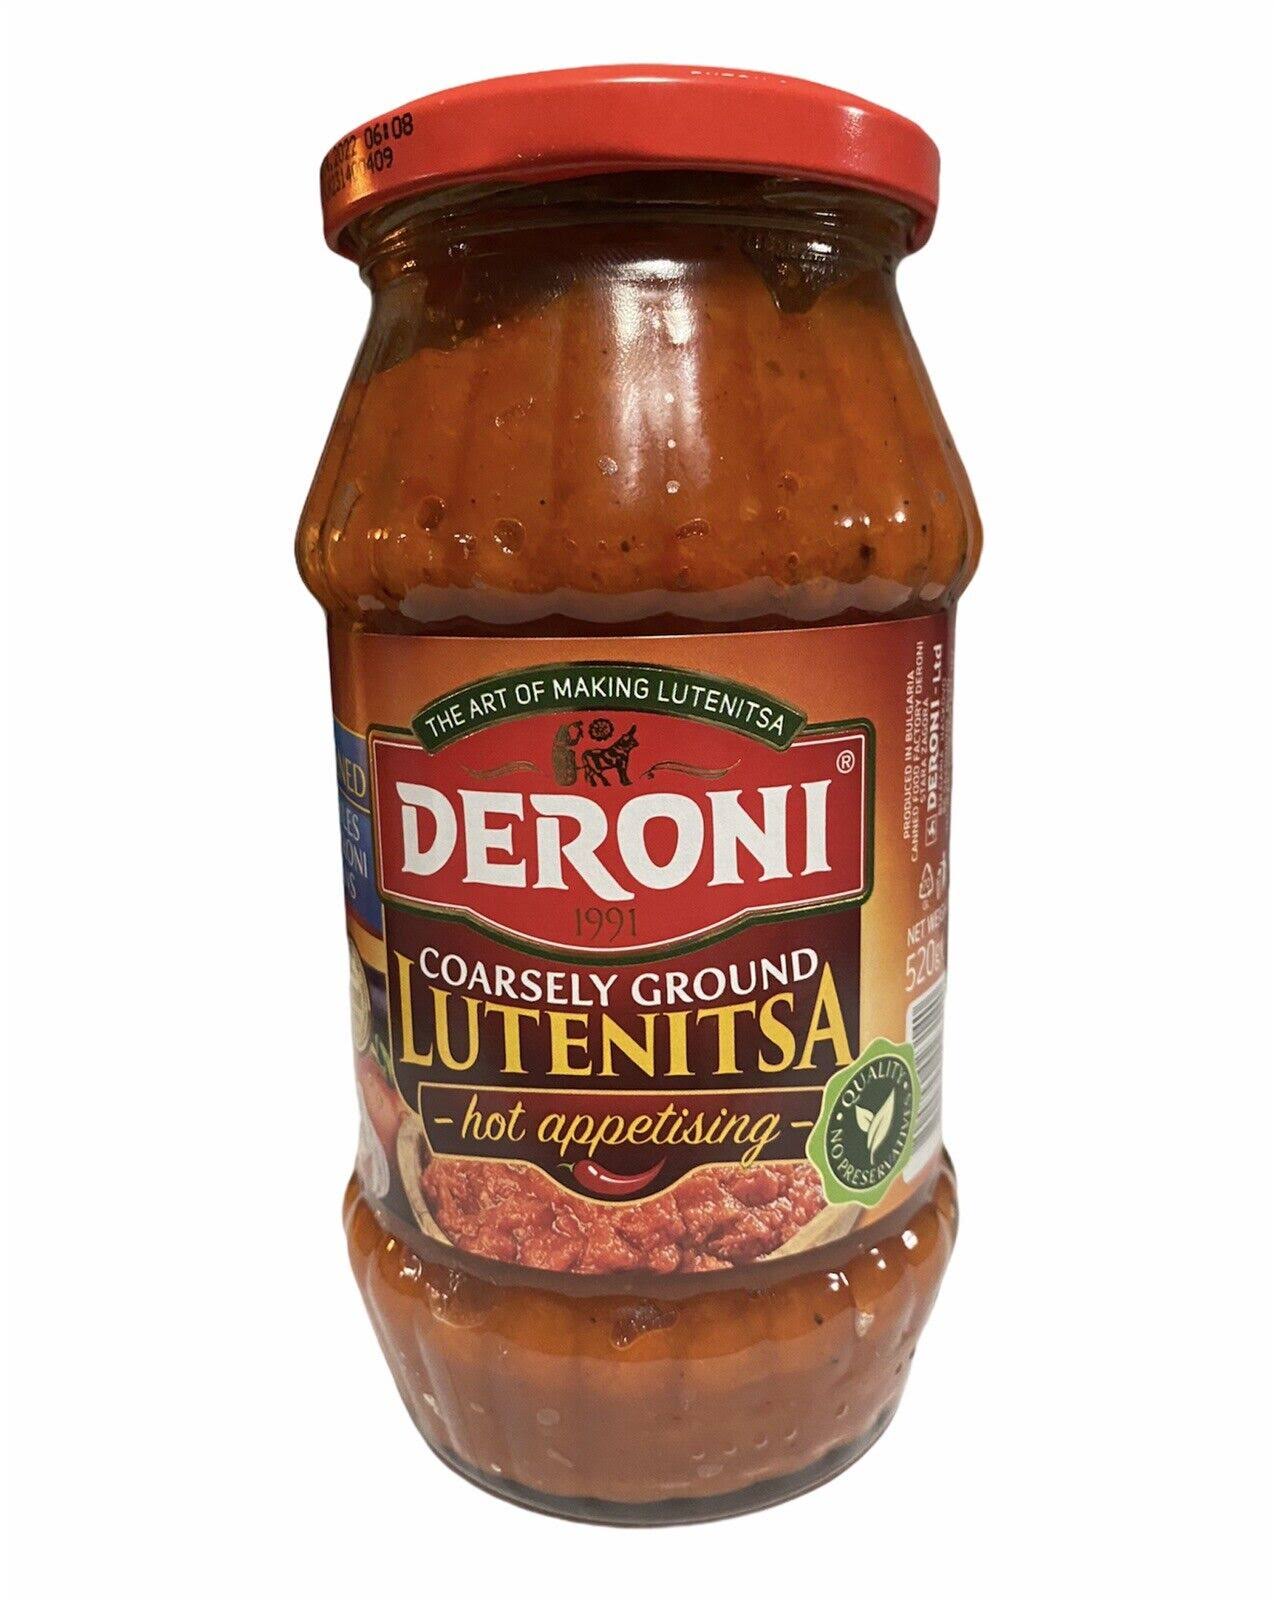 Deroni Bulgarian Lutenitsa Mild Vegetable Coarsely Ground Spread - 18.3 Ounces - Parrot Coffee - Delivered by Mercato